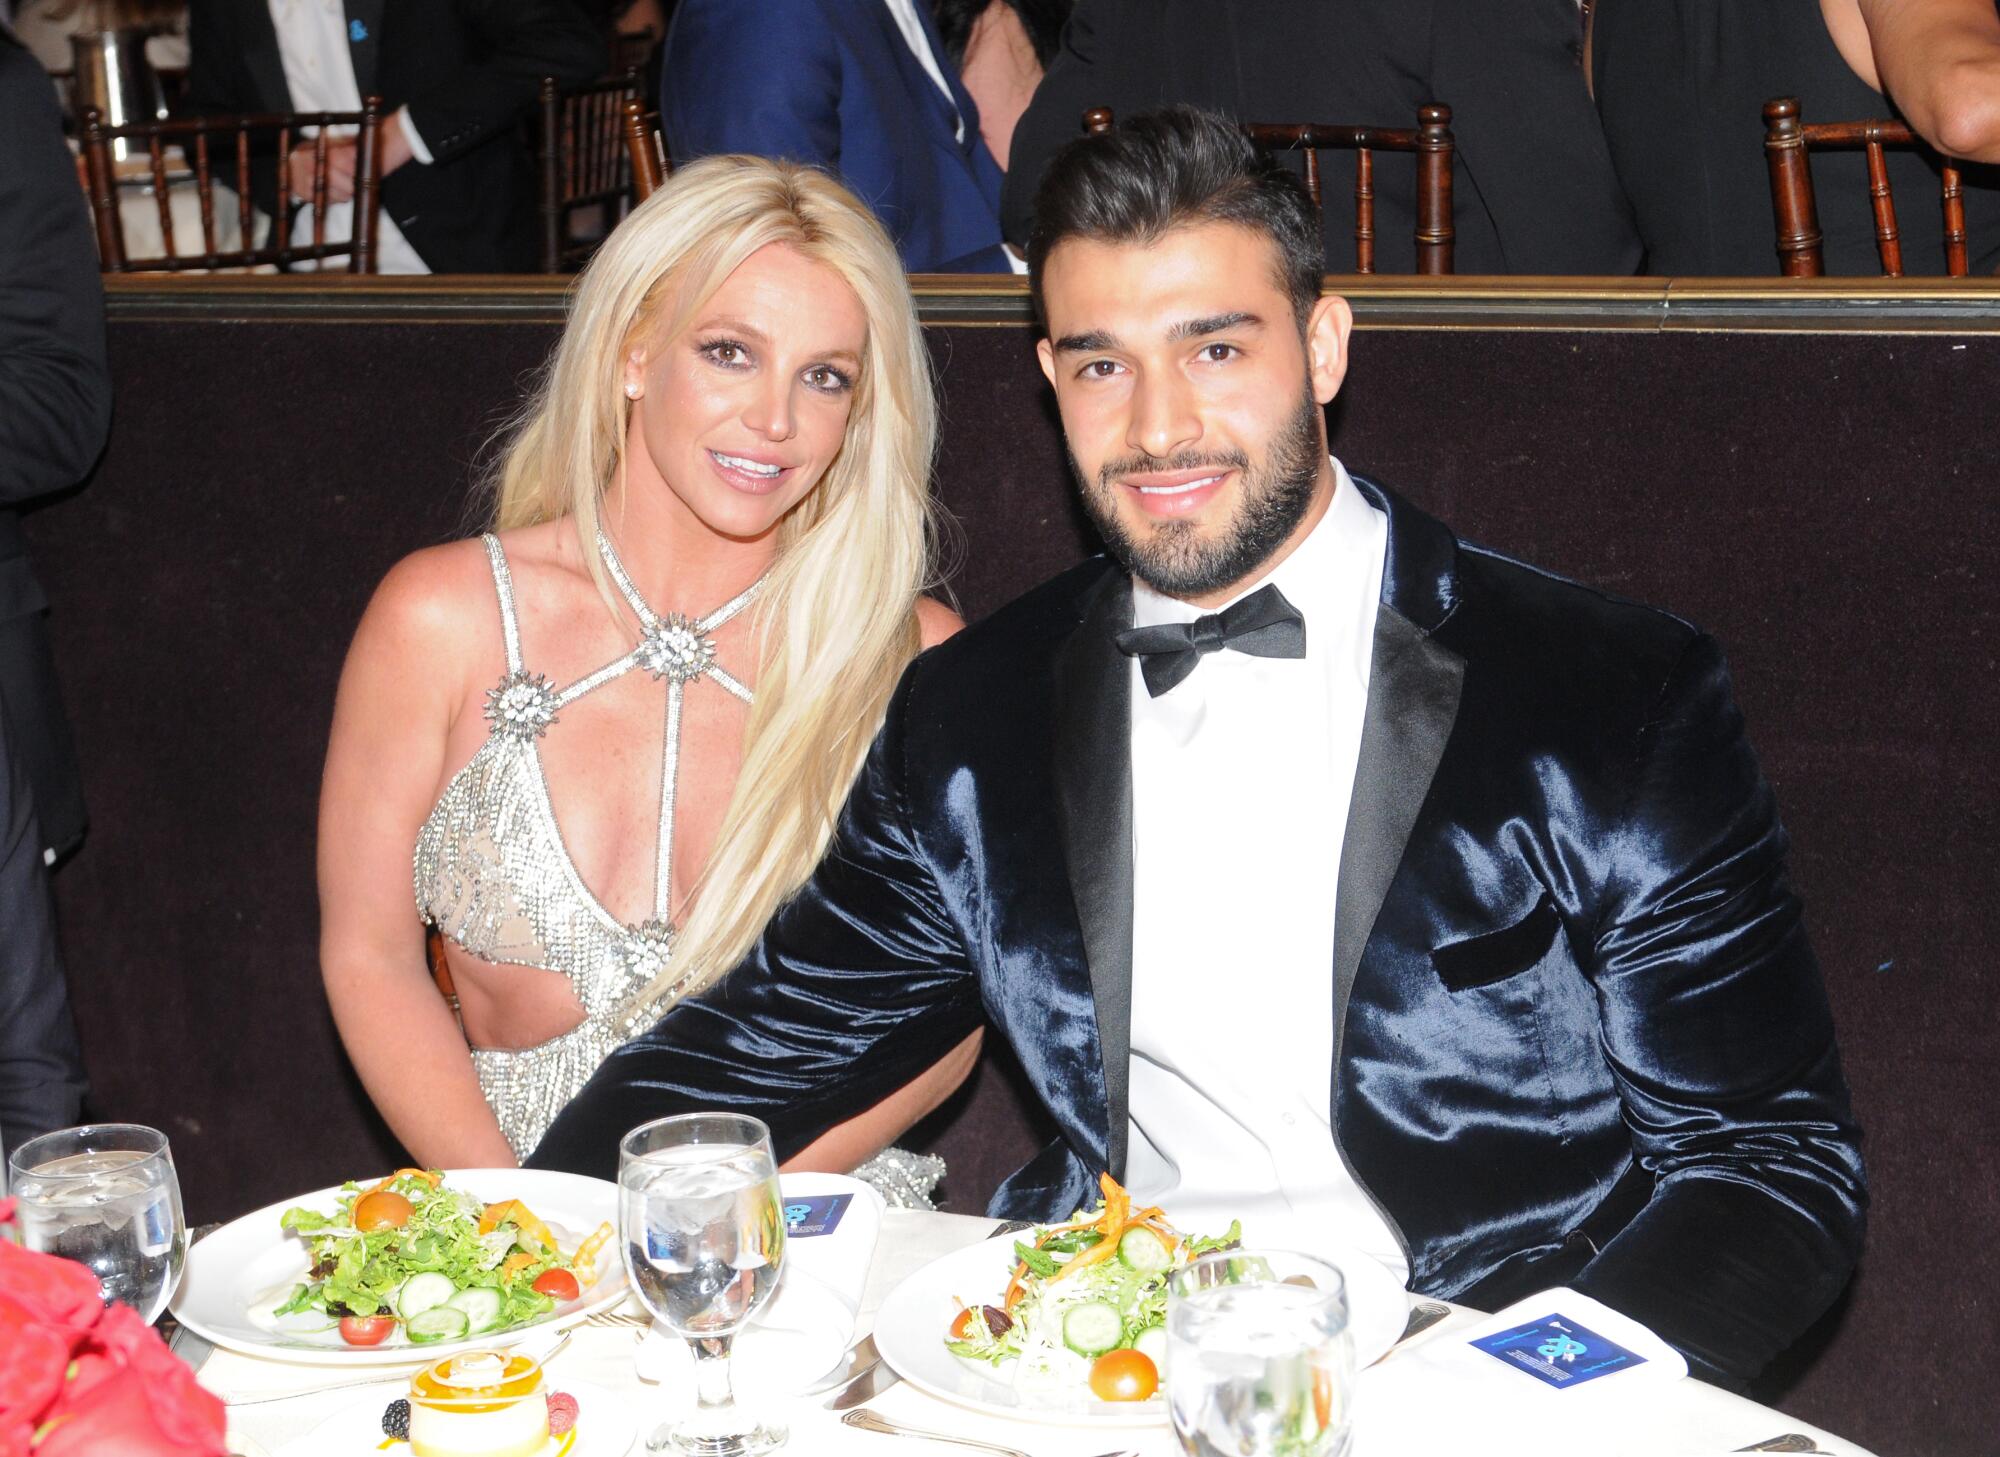 Britney Spears, wearing a silver dress, is sitting at a dinner table with Sam Asghari in a blue velvet suit